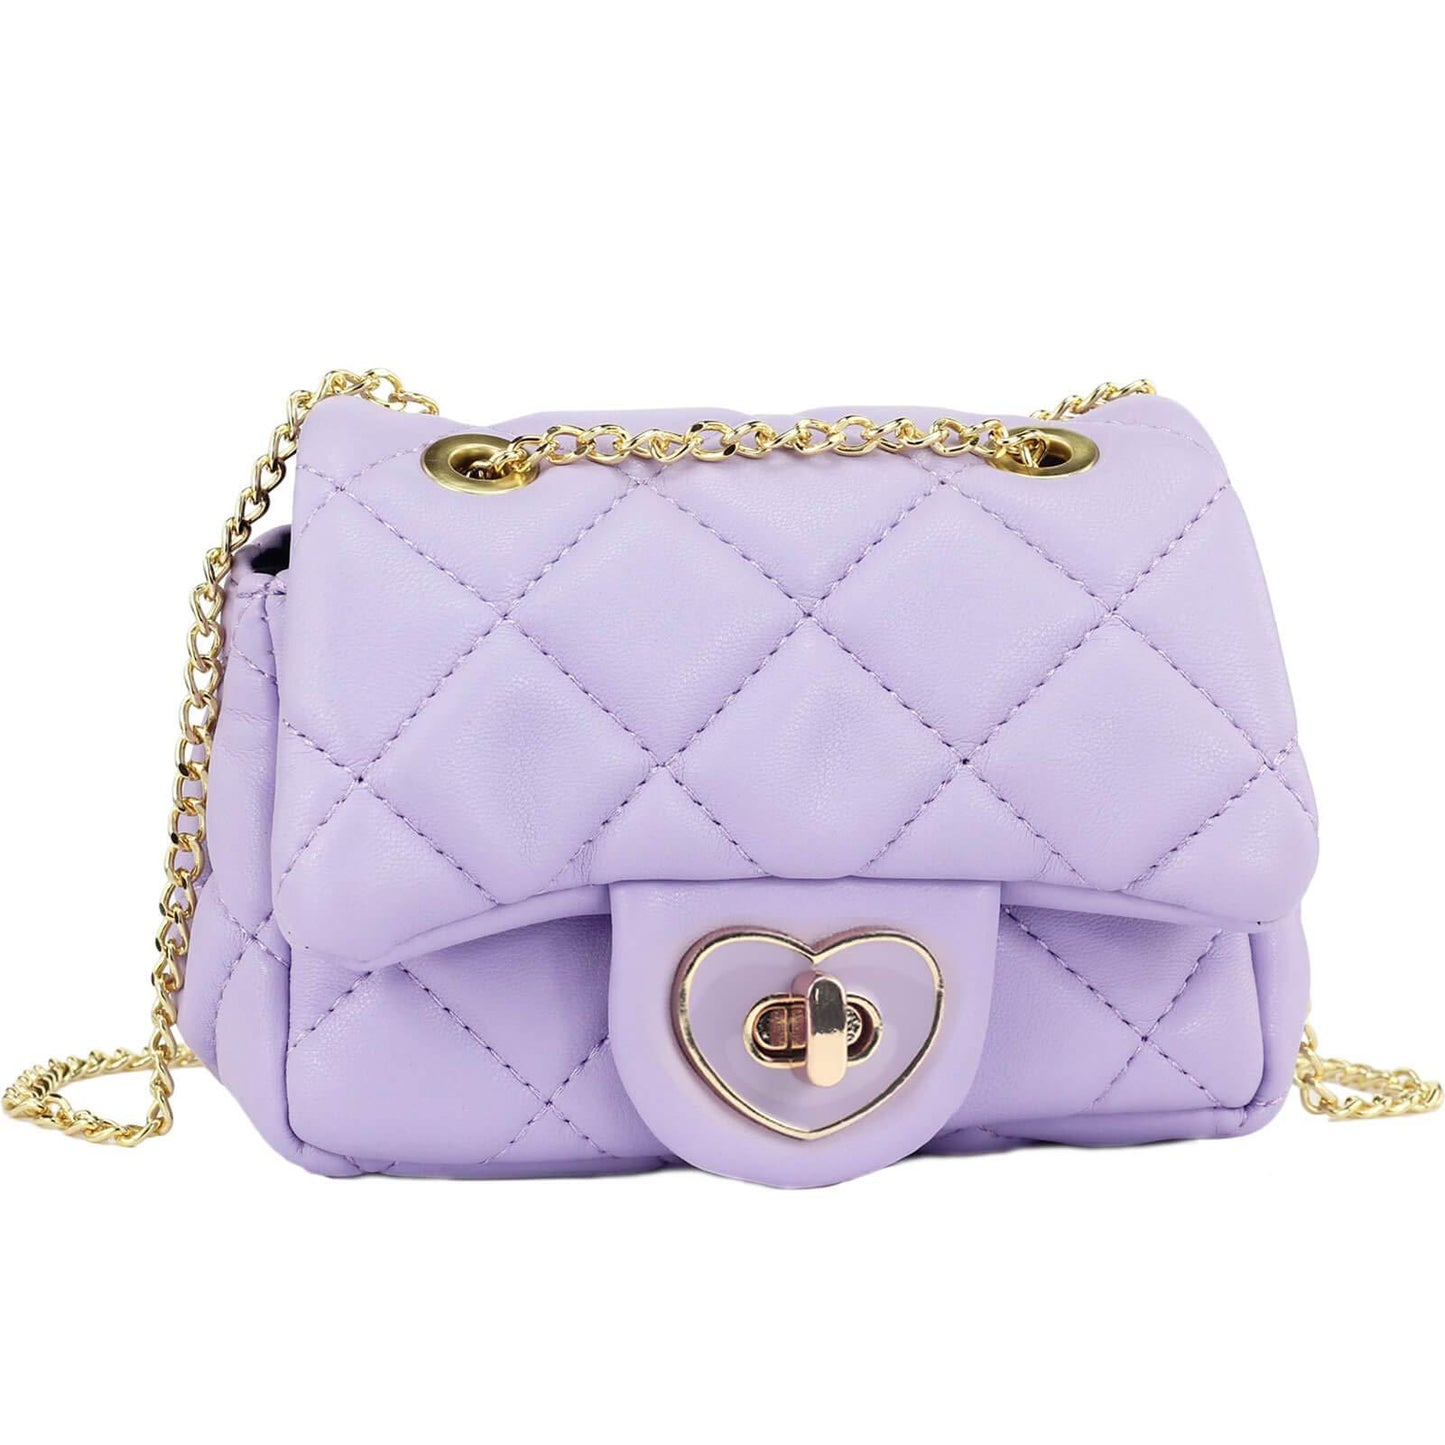 Toddler Mini Purse-Recommended by TikTok@Its_nallely Crossbody Bag Discount code be applied while checkout Lambskin Purple 